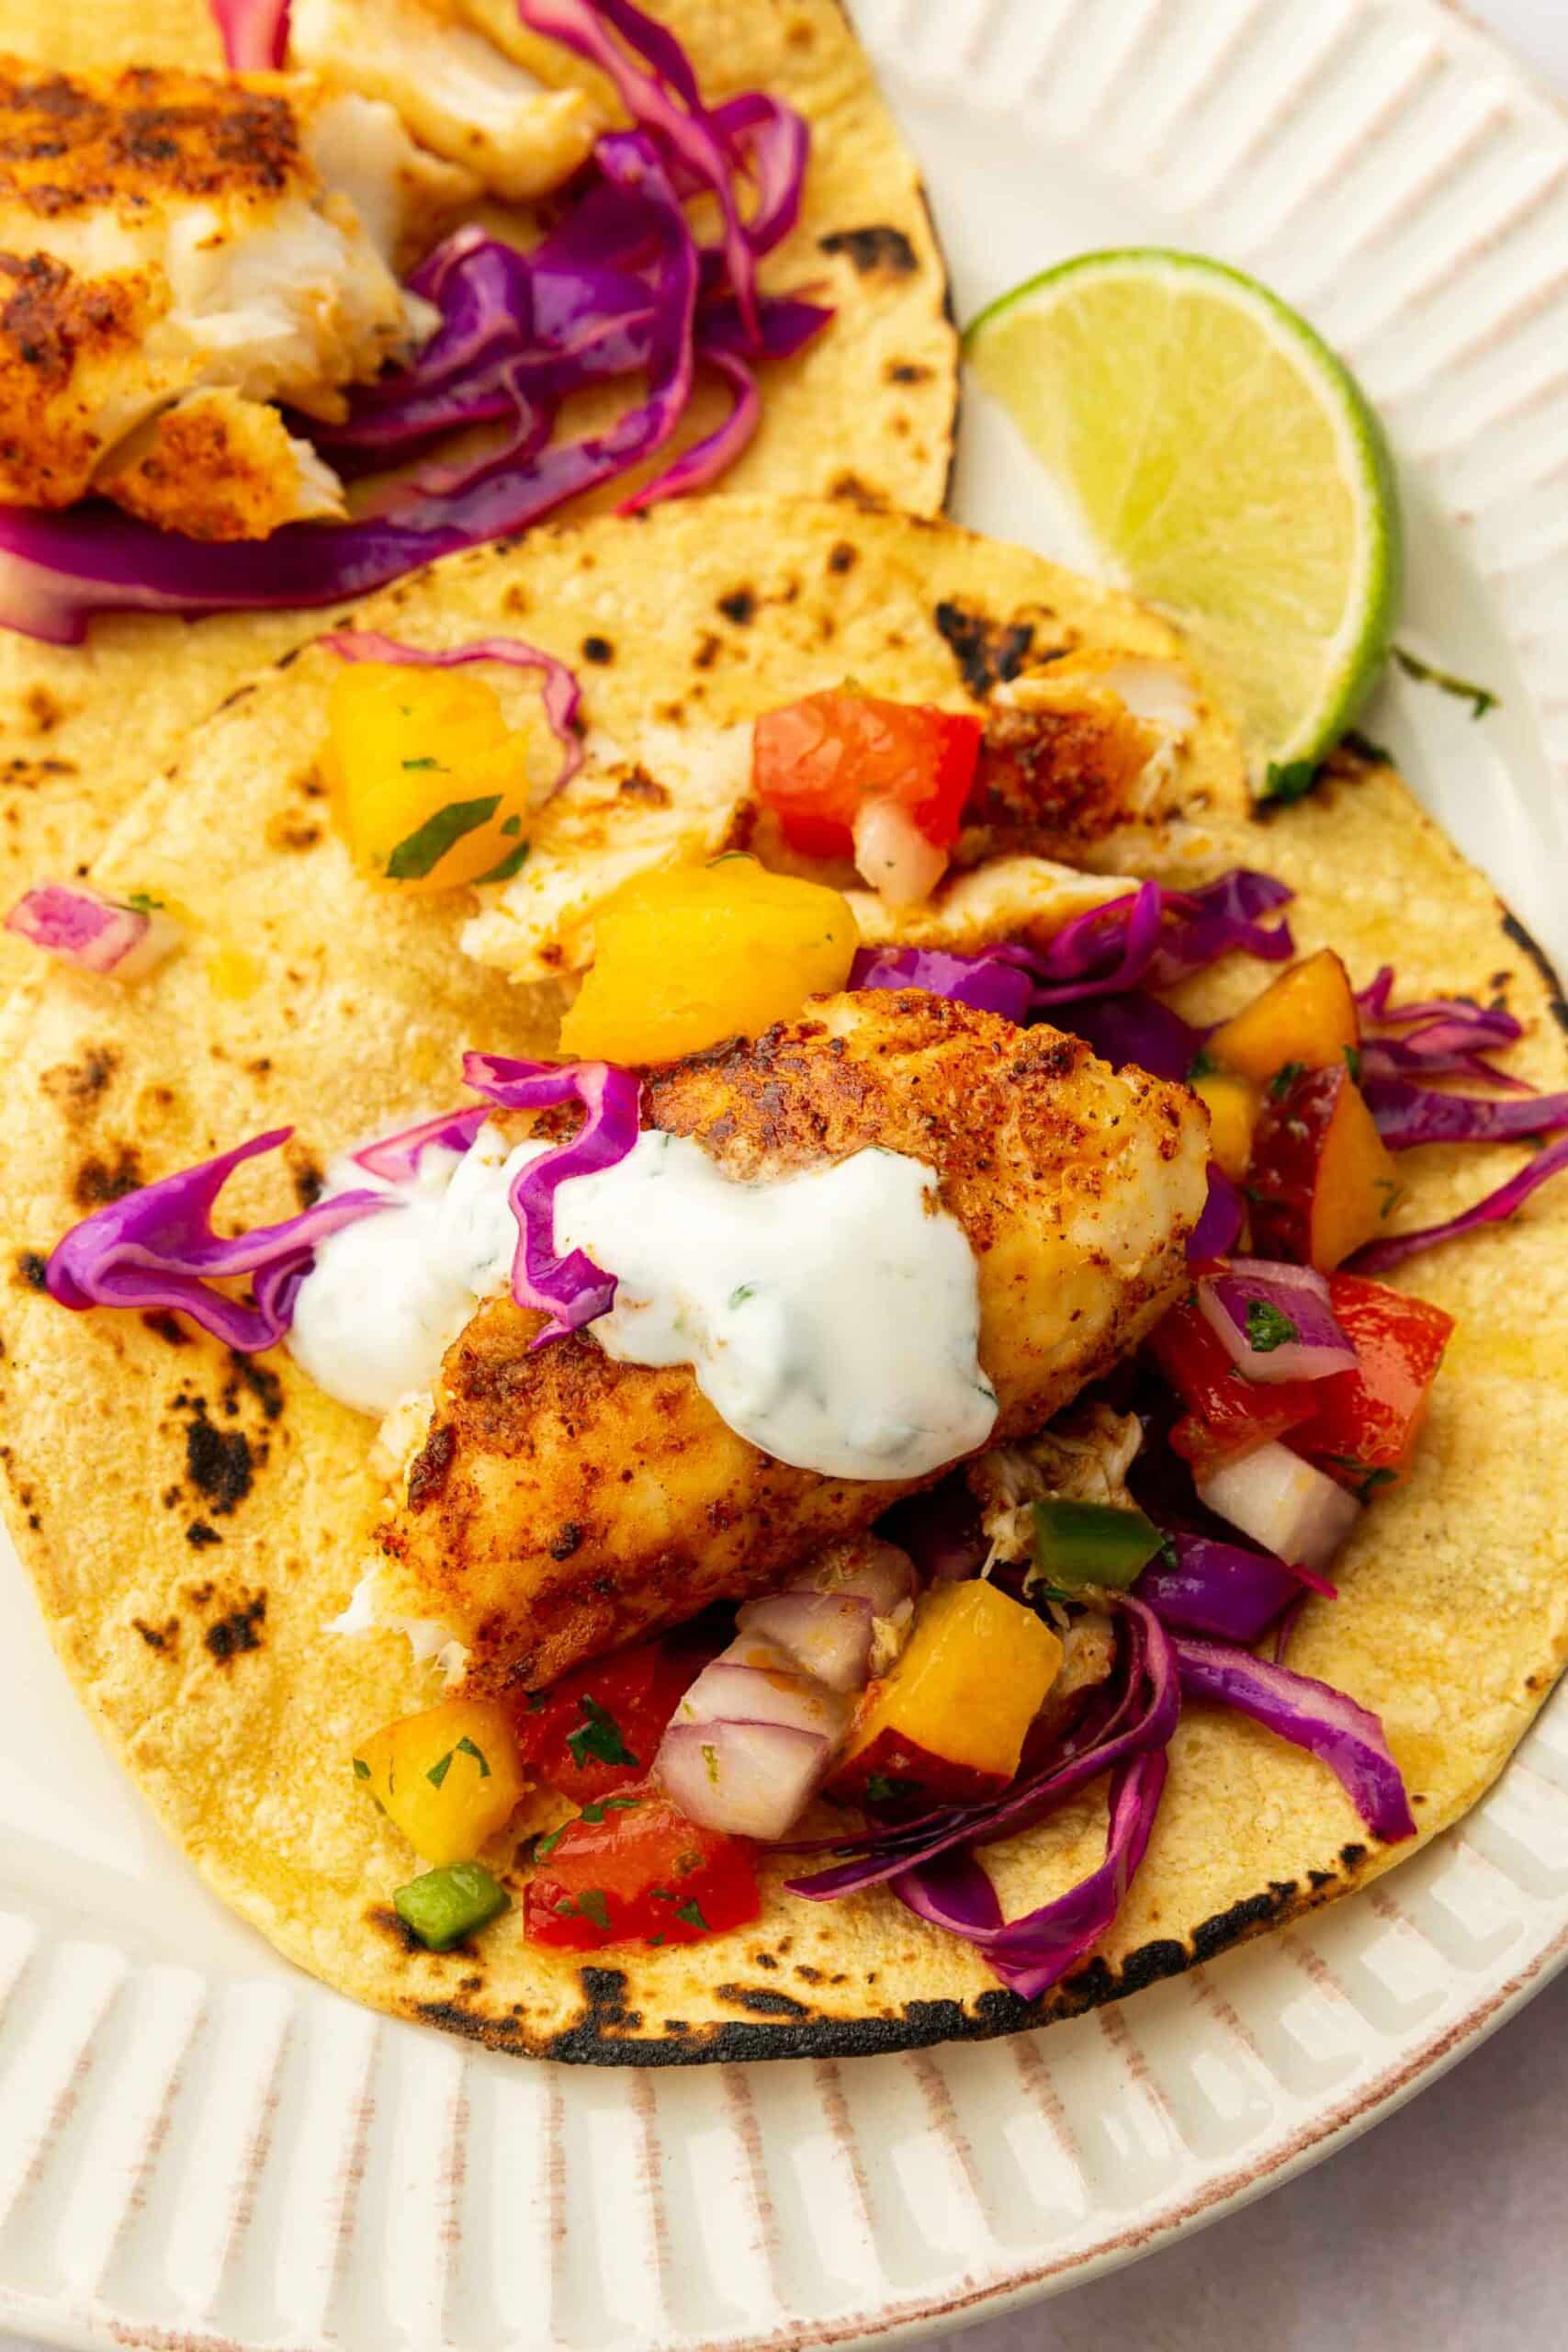 A close up of a fish taco topped with fruit salsa, red cabbage slaw and cilantro lime crema on a charred corn tortilla.